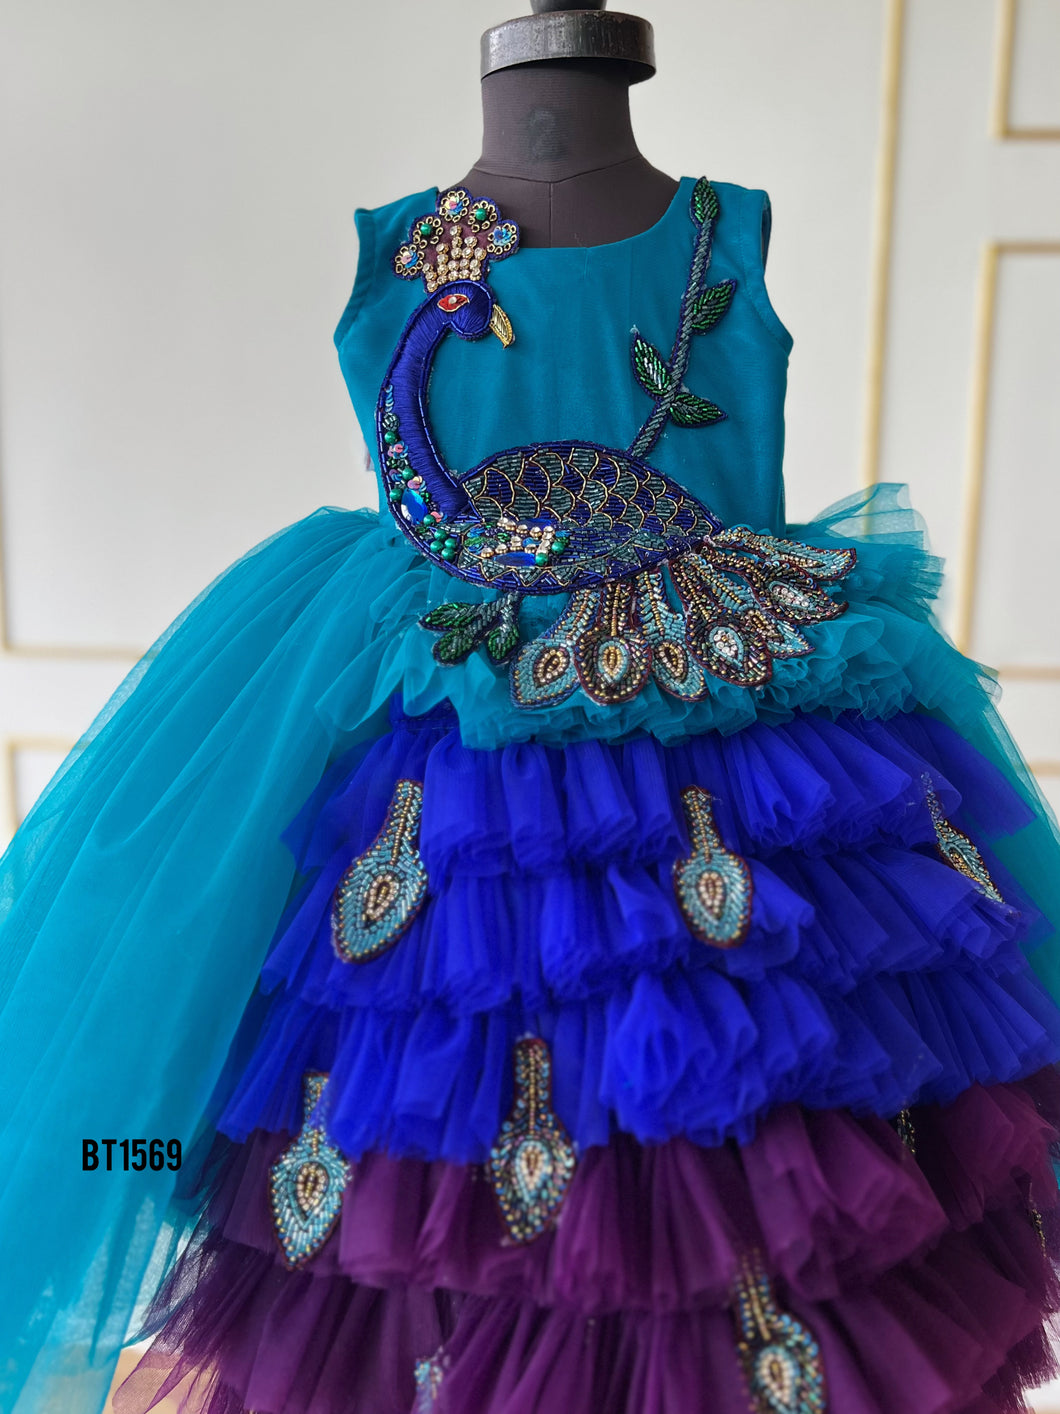 BT1569 Enchanted Peacock Gala Gown – Radiant Jewel Tones for Little Royalty